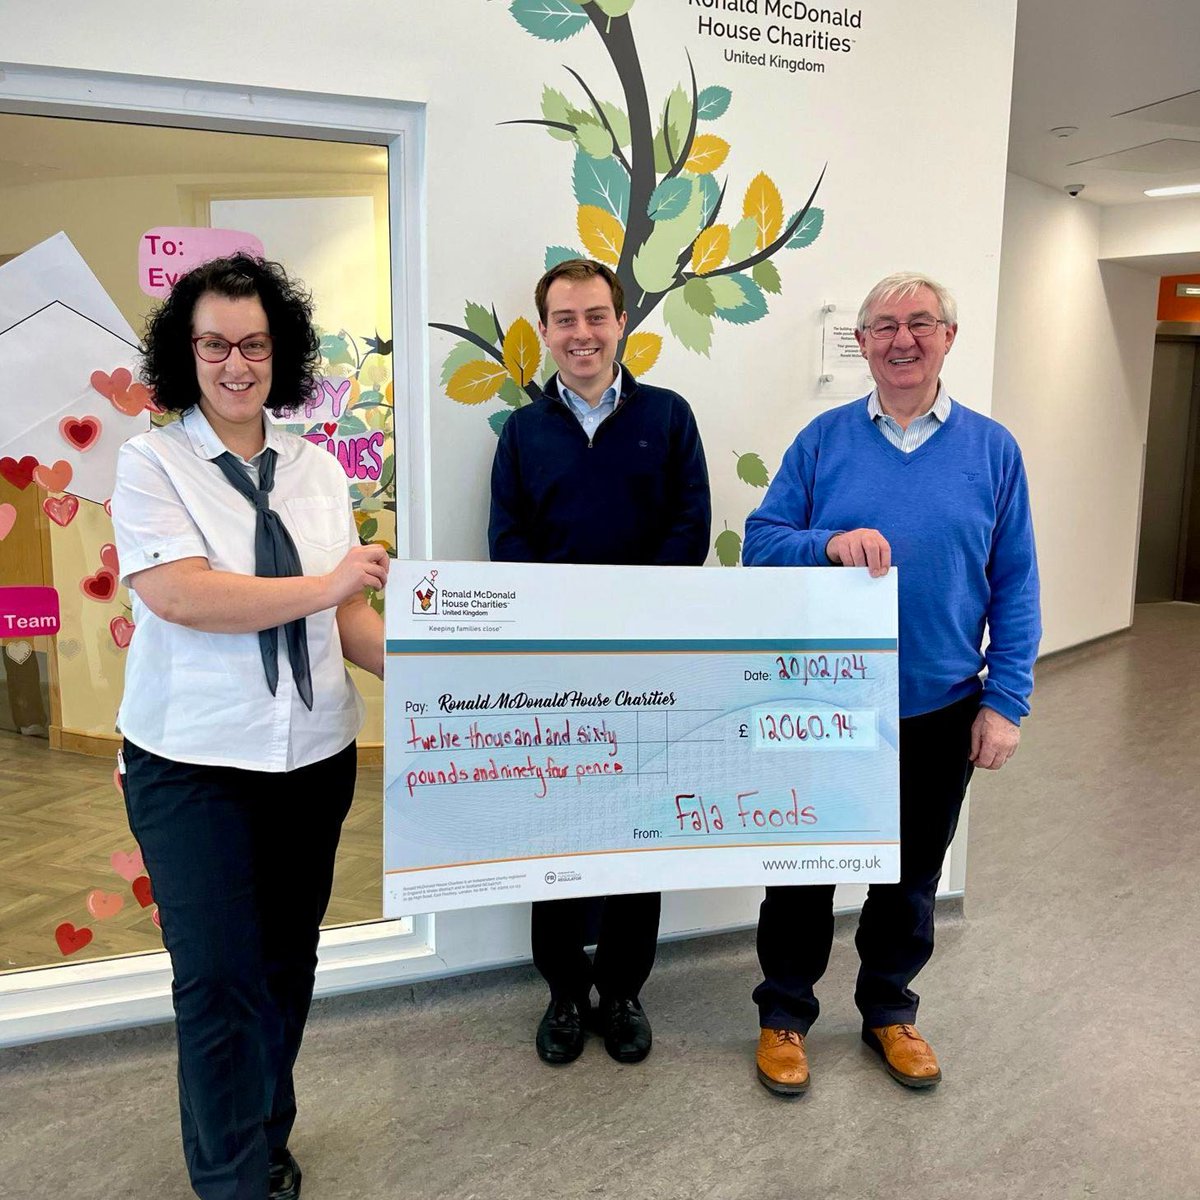 We recently invited father and son Jimmy and William Patrick, and Dawn Cummings, from Fala Foods Ltd into our #Edinburgh House to unveil their room sponsorship plaque having raised more than £12,000 last year. 🙌 We're so grateful to have their support. ❤️